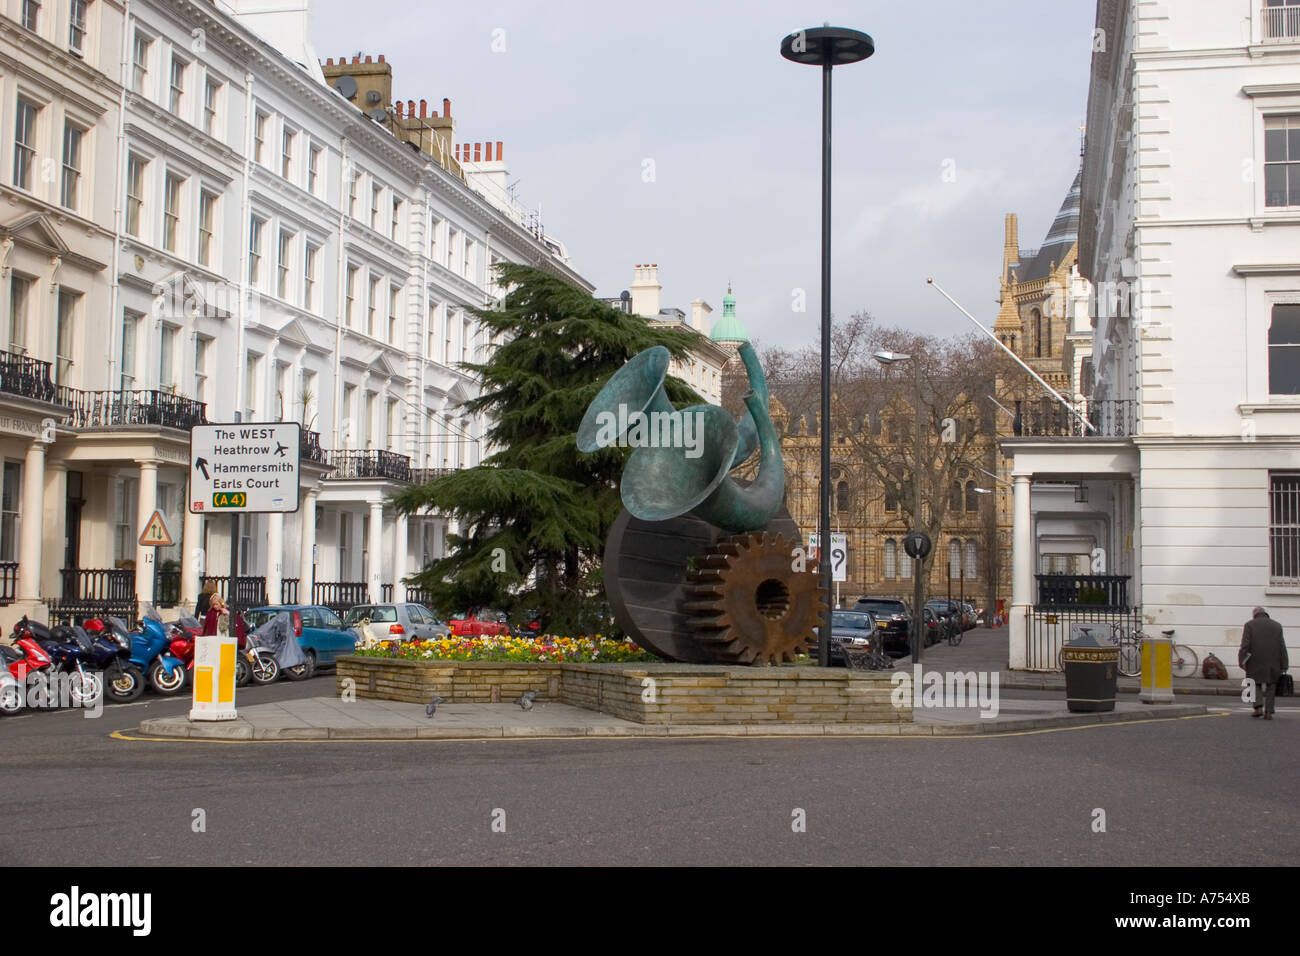 A sculpture of two musical horns on top of two mechanical cogs in Kensington London Stock Photo